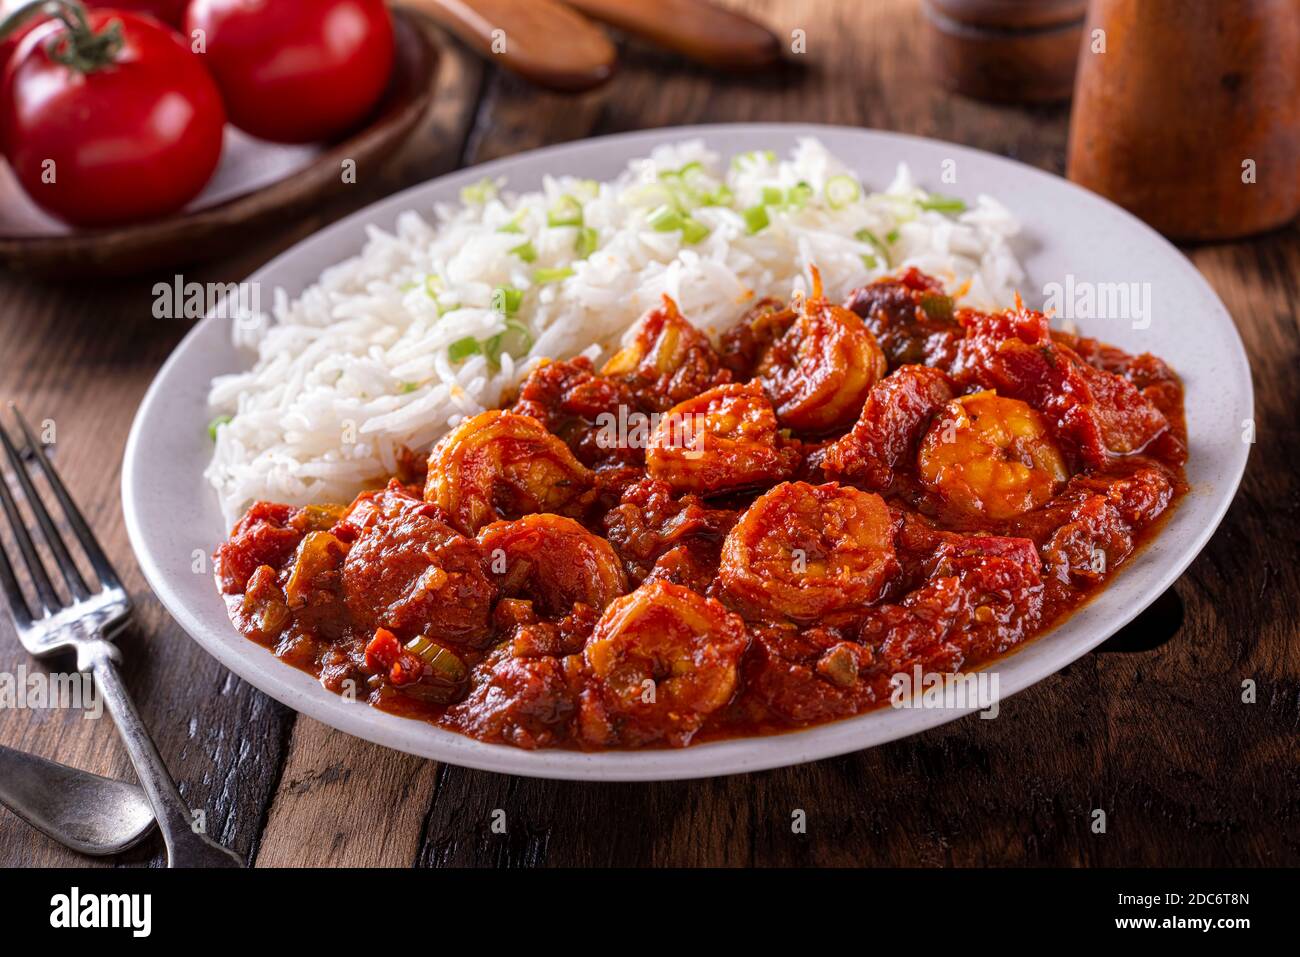 A plate of delicious southern style creole shrimp and sausage with white rice. Stock Photo